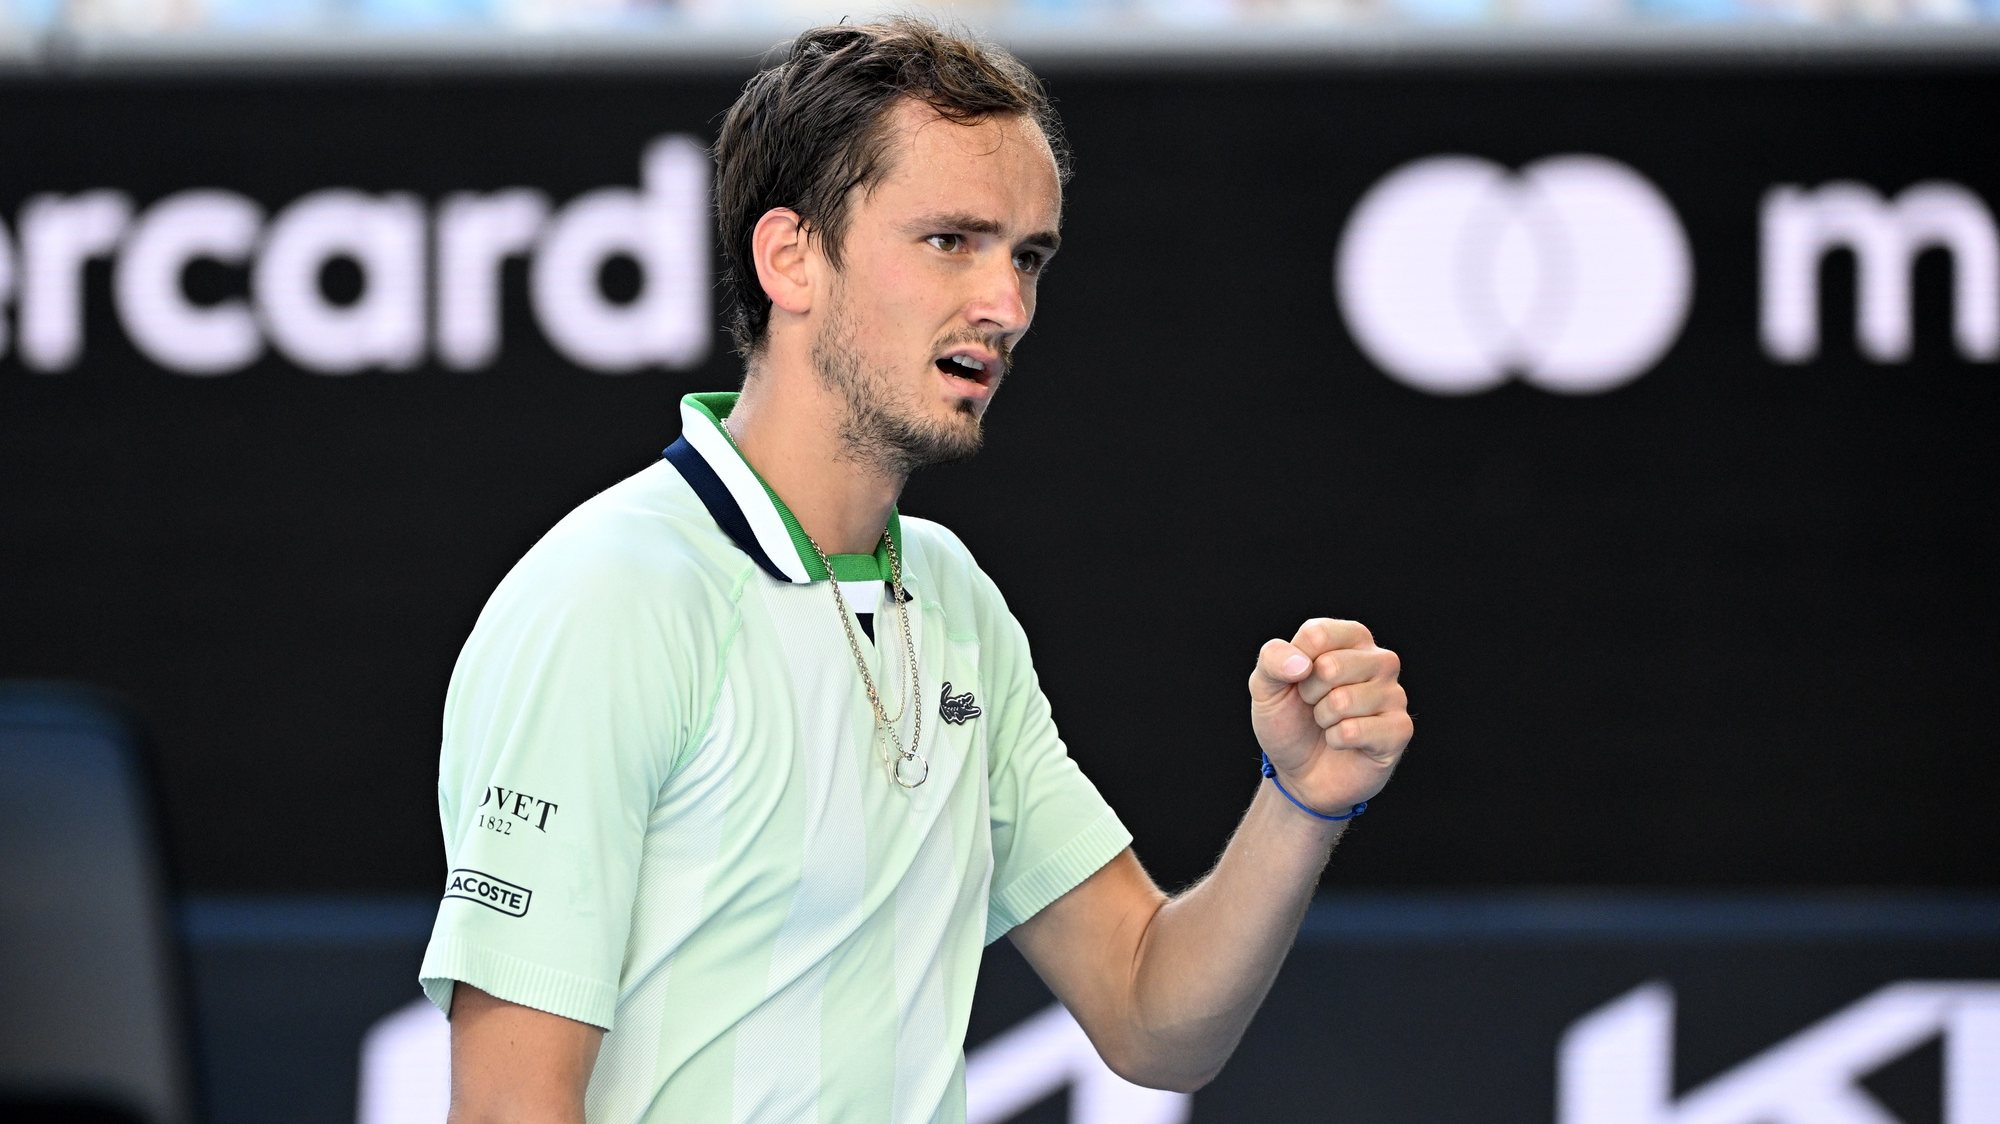 epa09701392 Daniil Medvedev of Russia reacts while in action against Botic van de Zandschulp of the Netherlands during their third round match of the Australian Open Tennis Tournament at Melbourne Park in Melbourne, Australia, 22 January 2022.  EPA/DAVE HUNT  AUSTRALIA AND NEW ZEALAND OUT